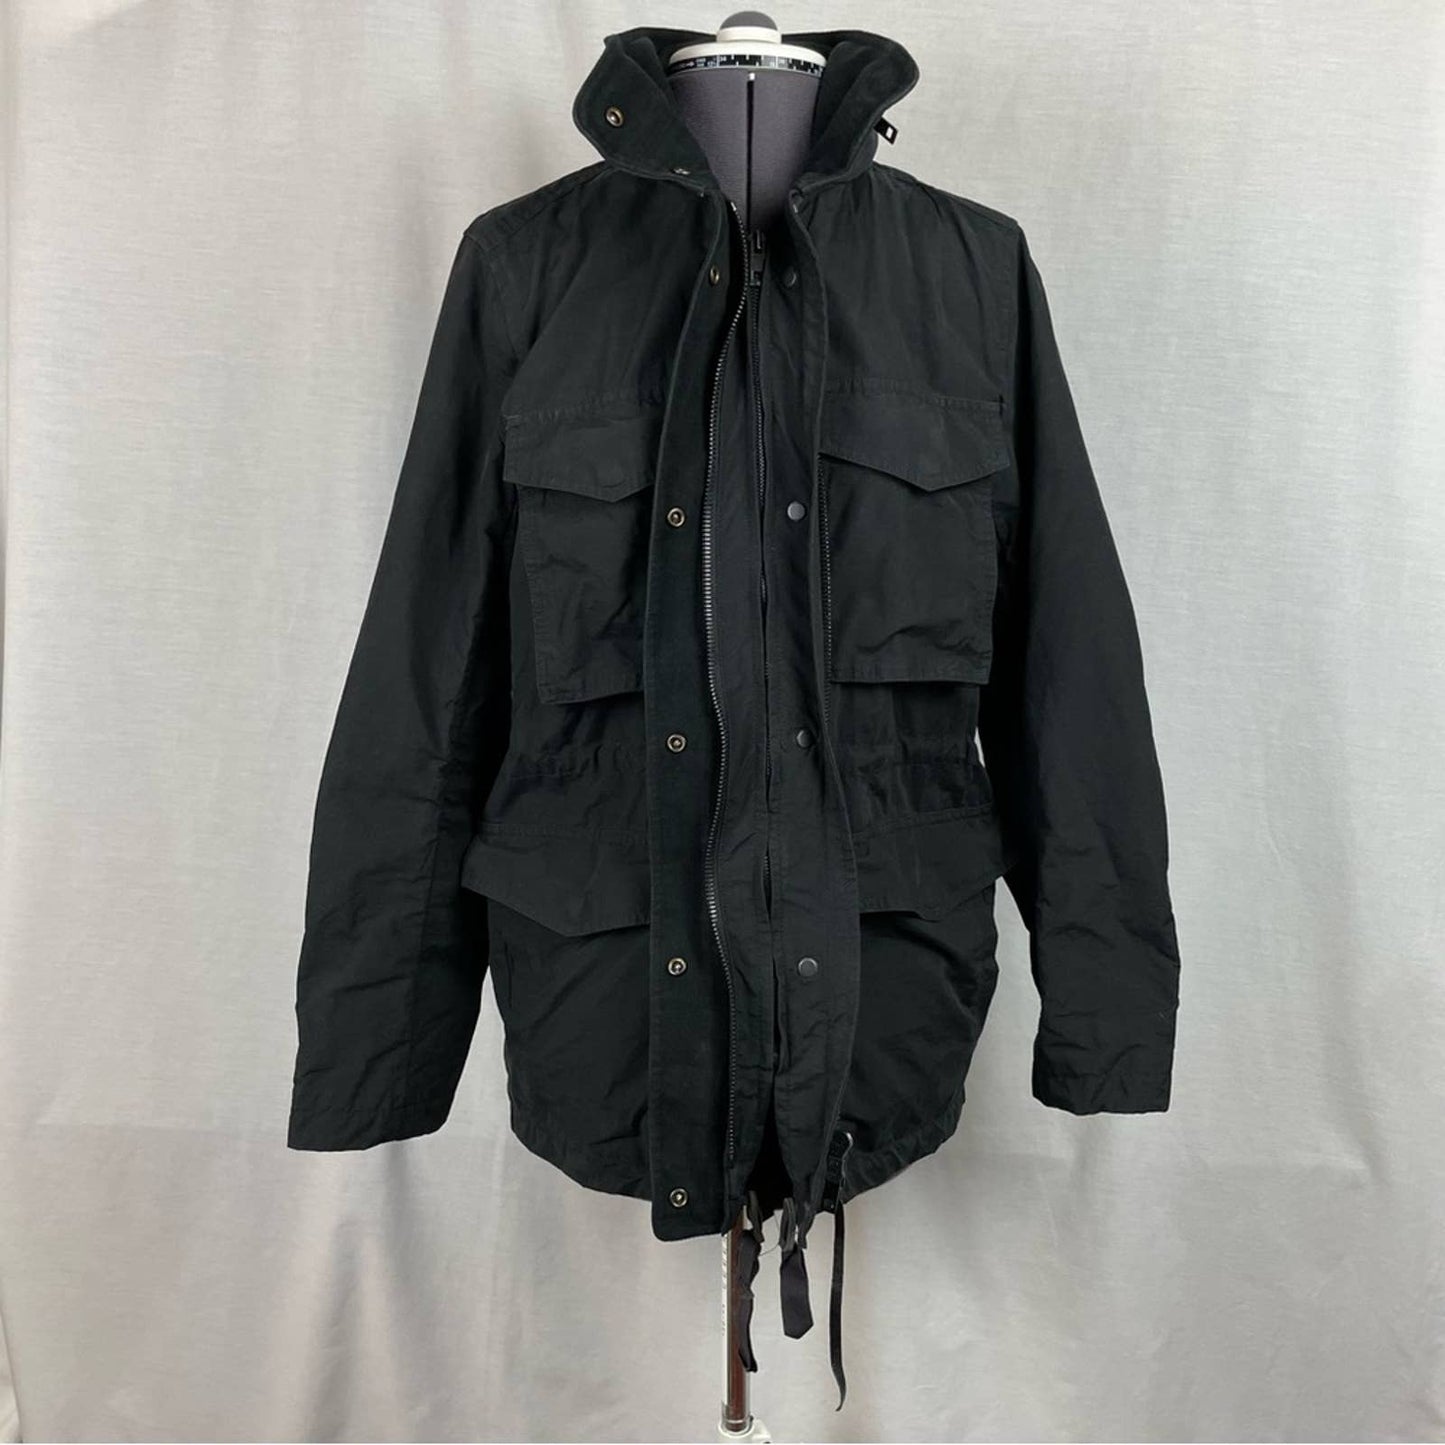 rag & bone Black Military Style Utility Jacket Coat Hood !! Shell Only - as-is!! Size 4